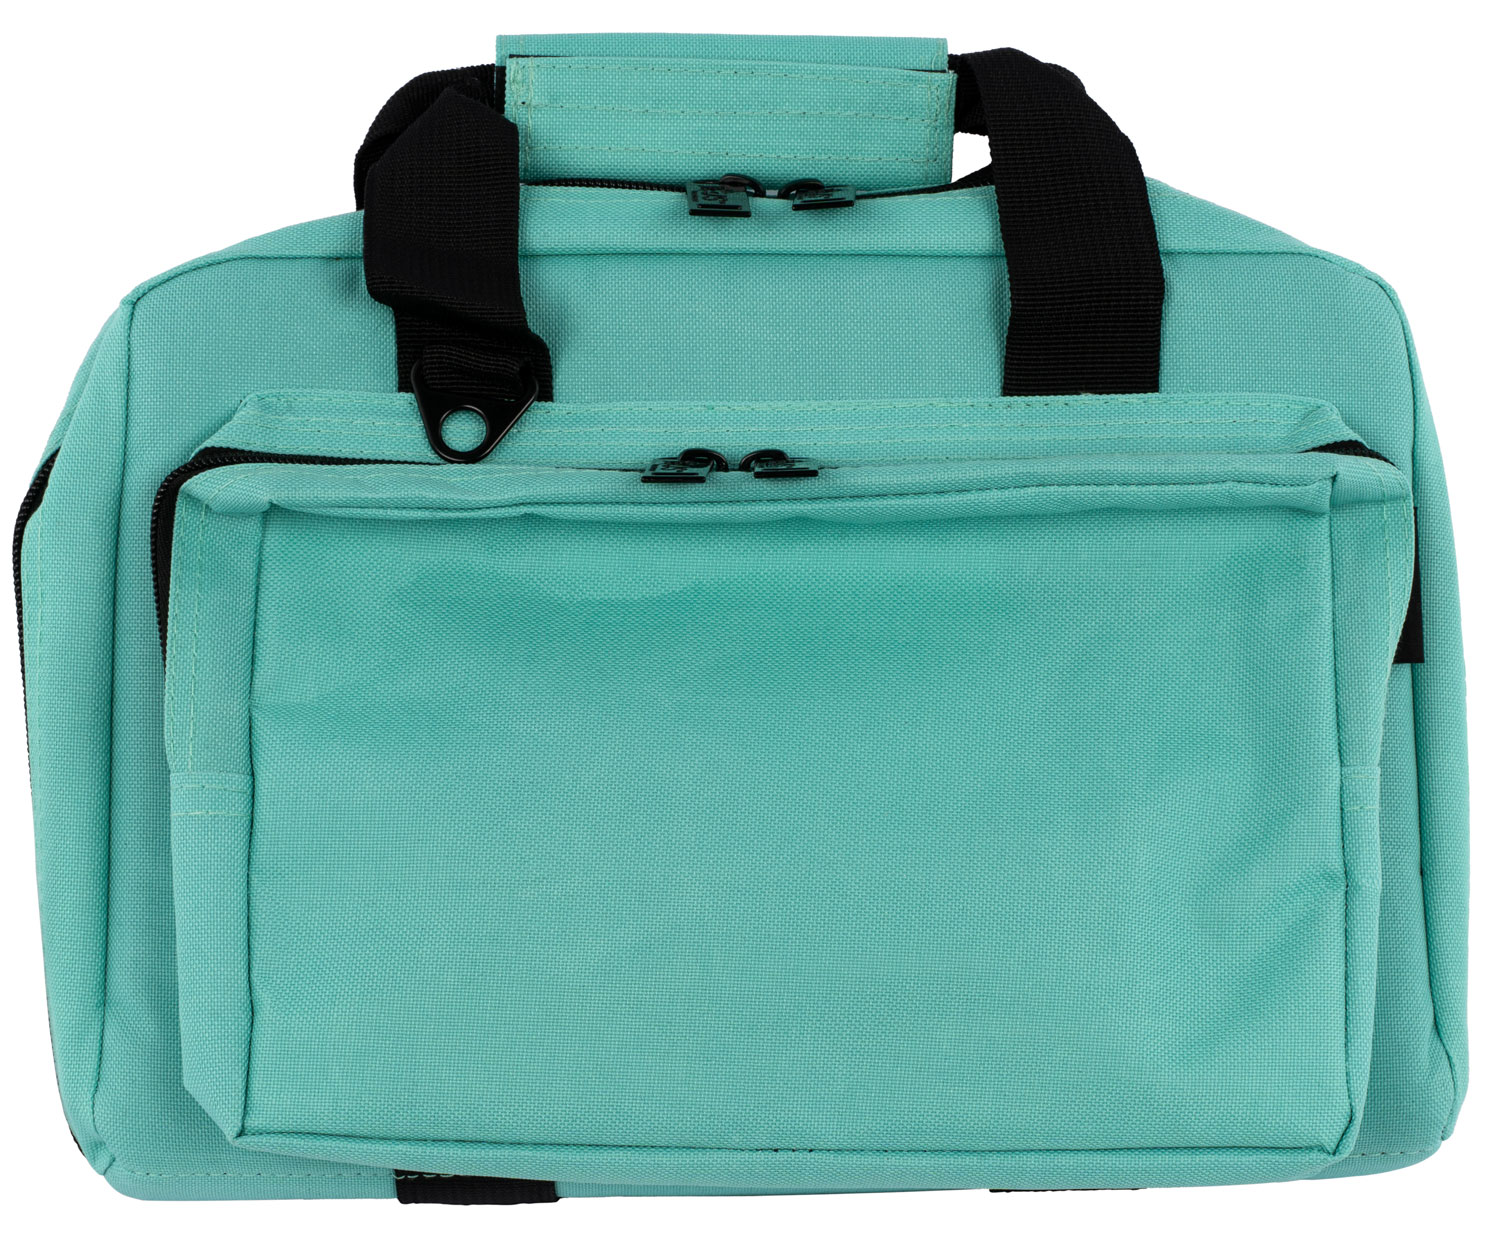 US PeaceKeeper P21102 Mini Range Bag Water Resistant Robins Egg Blue 600D Polyester with 8 Mag Pockets, Lockable Zippers & Wraparound Handles 12.75